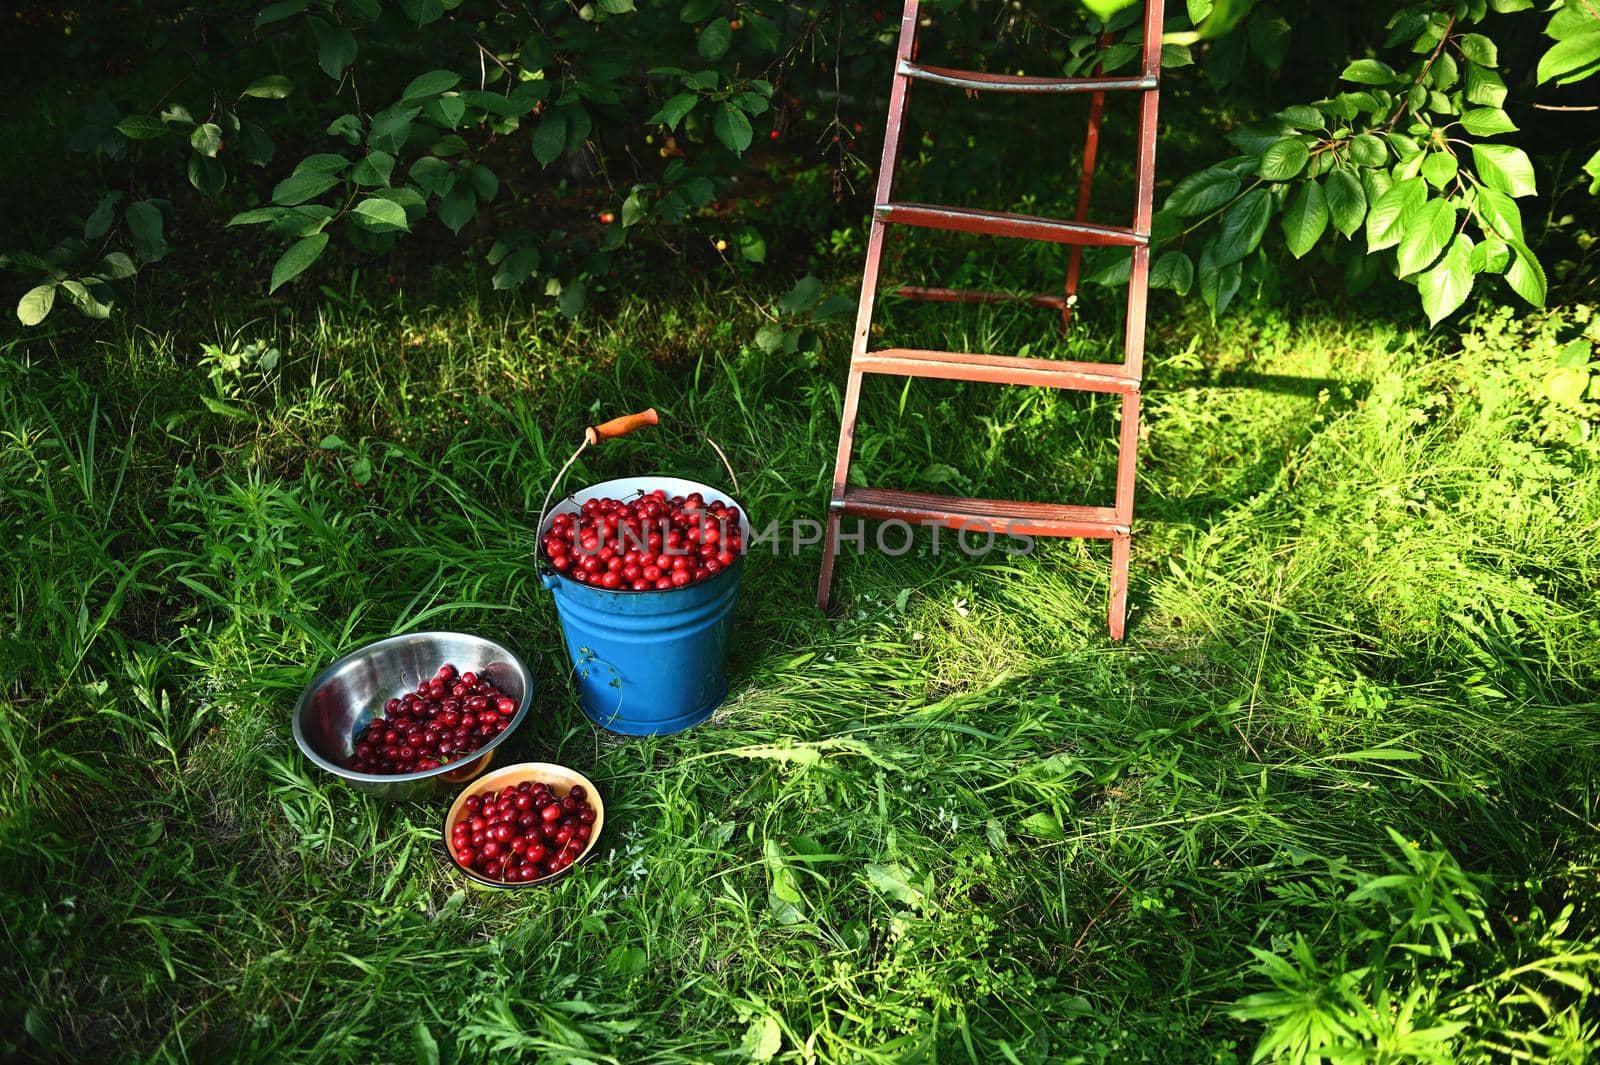 Harvesting cherries. Bucket and bowls of freshly picked cherries on the background of old ladder on green grass in orchard. Collection of cherry